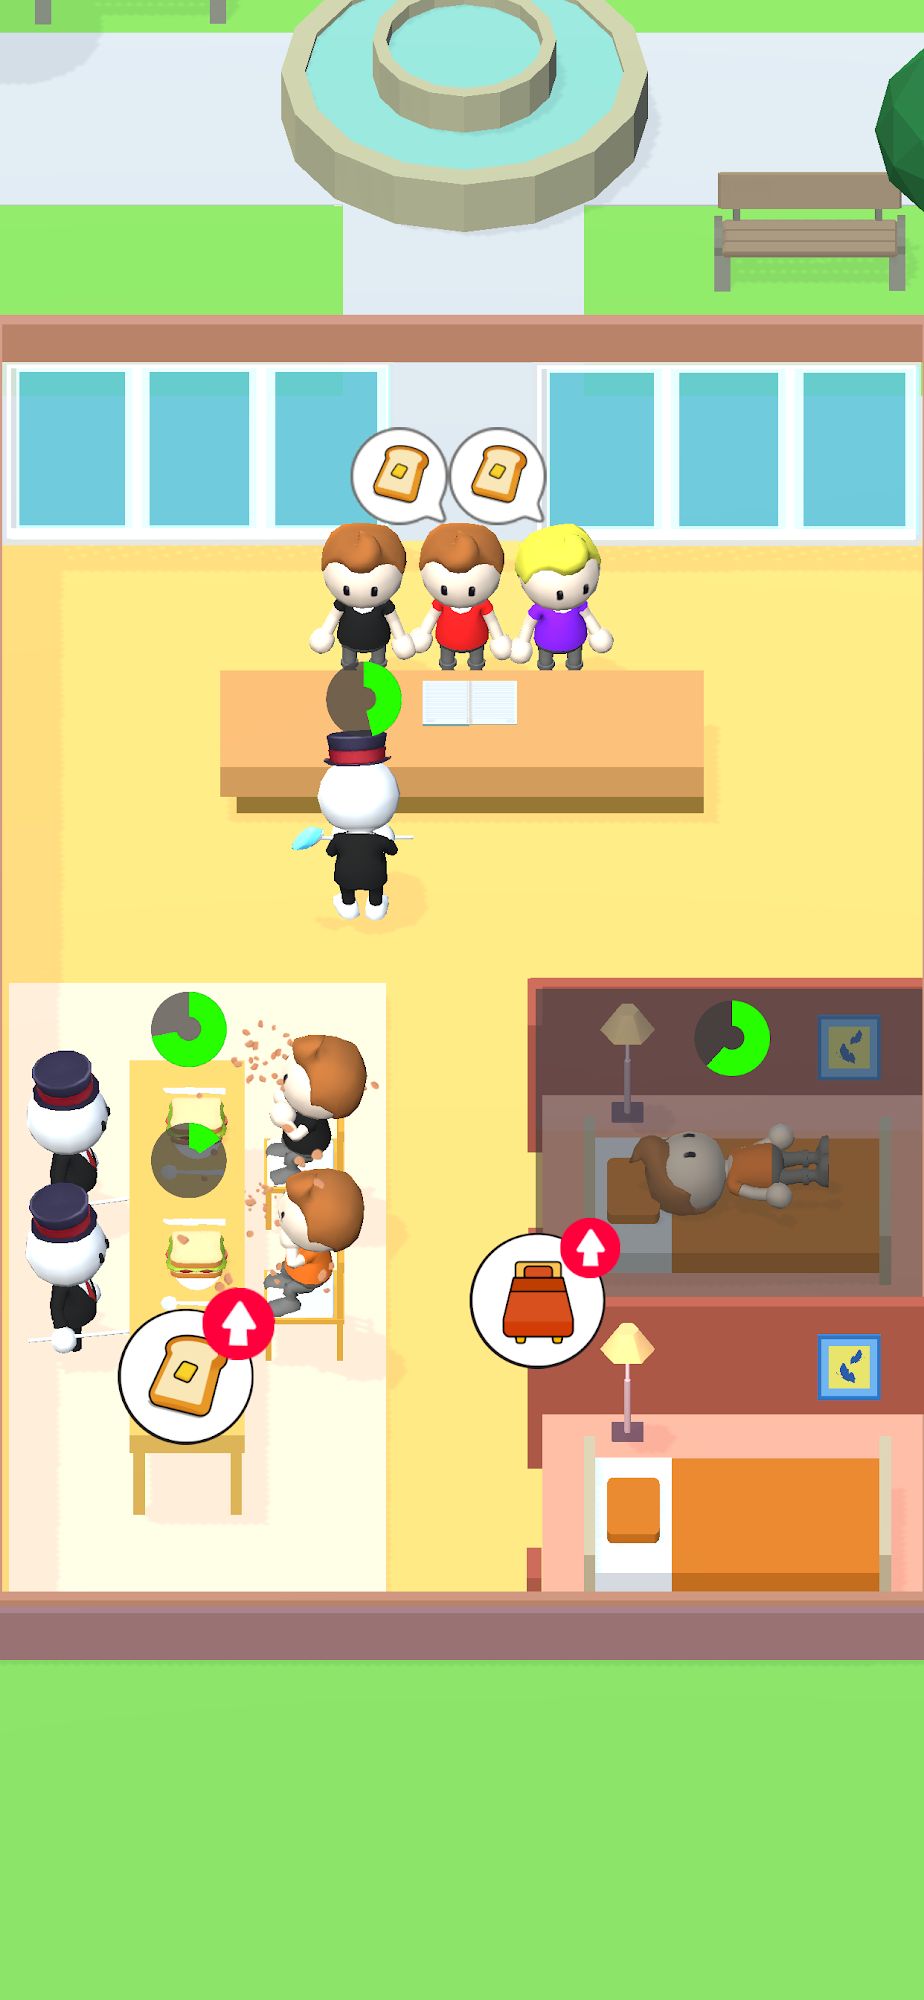 Gameplay of the My Hotel Life for Android phone or tablet.